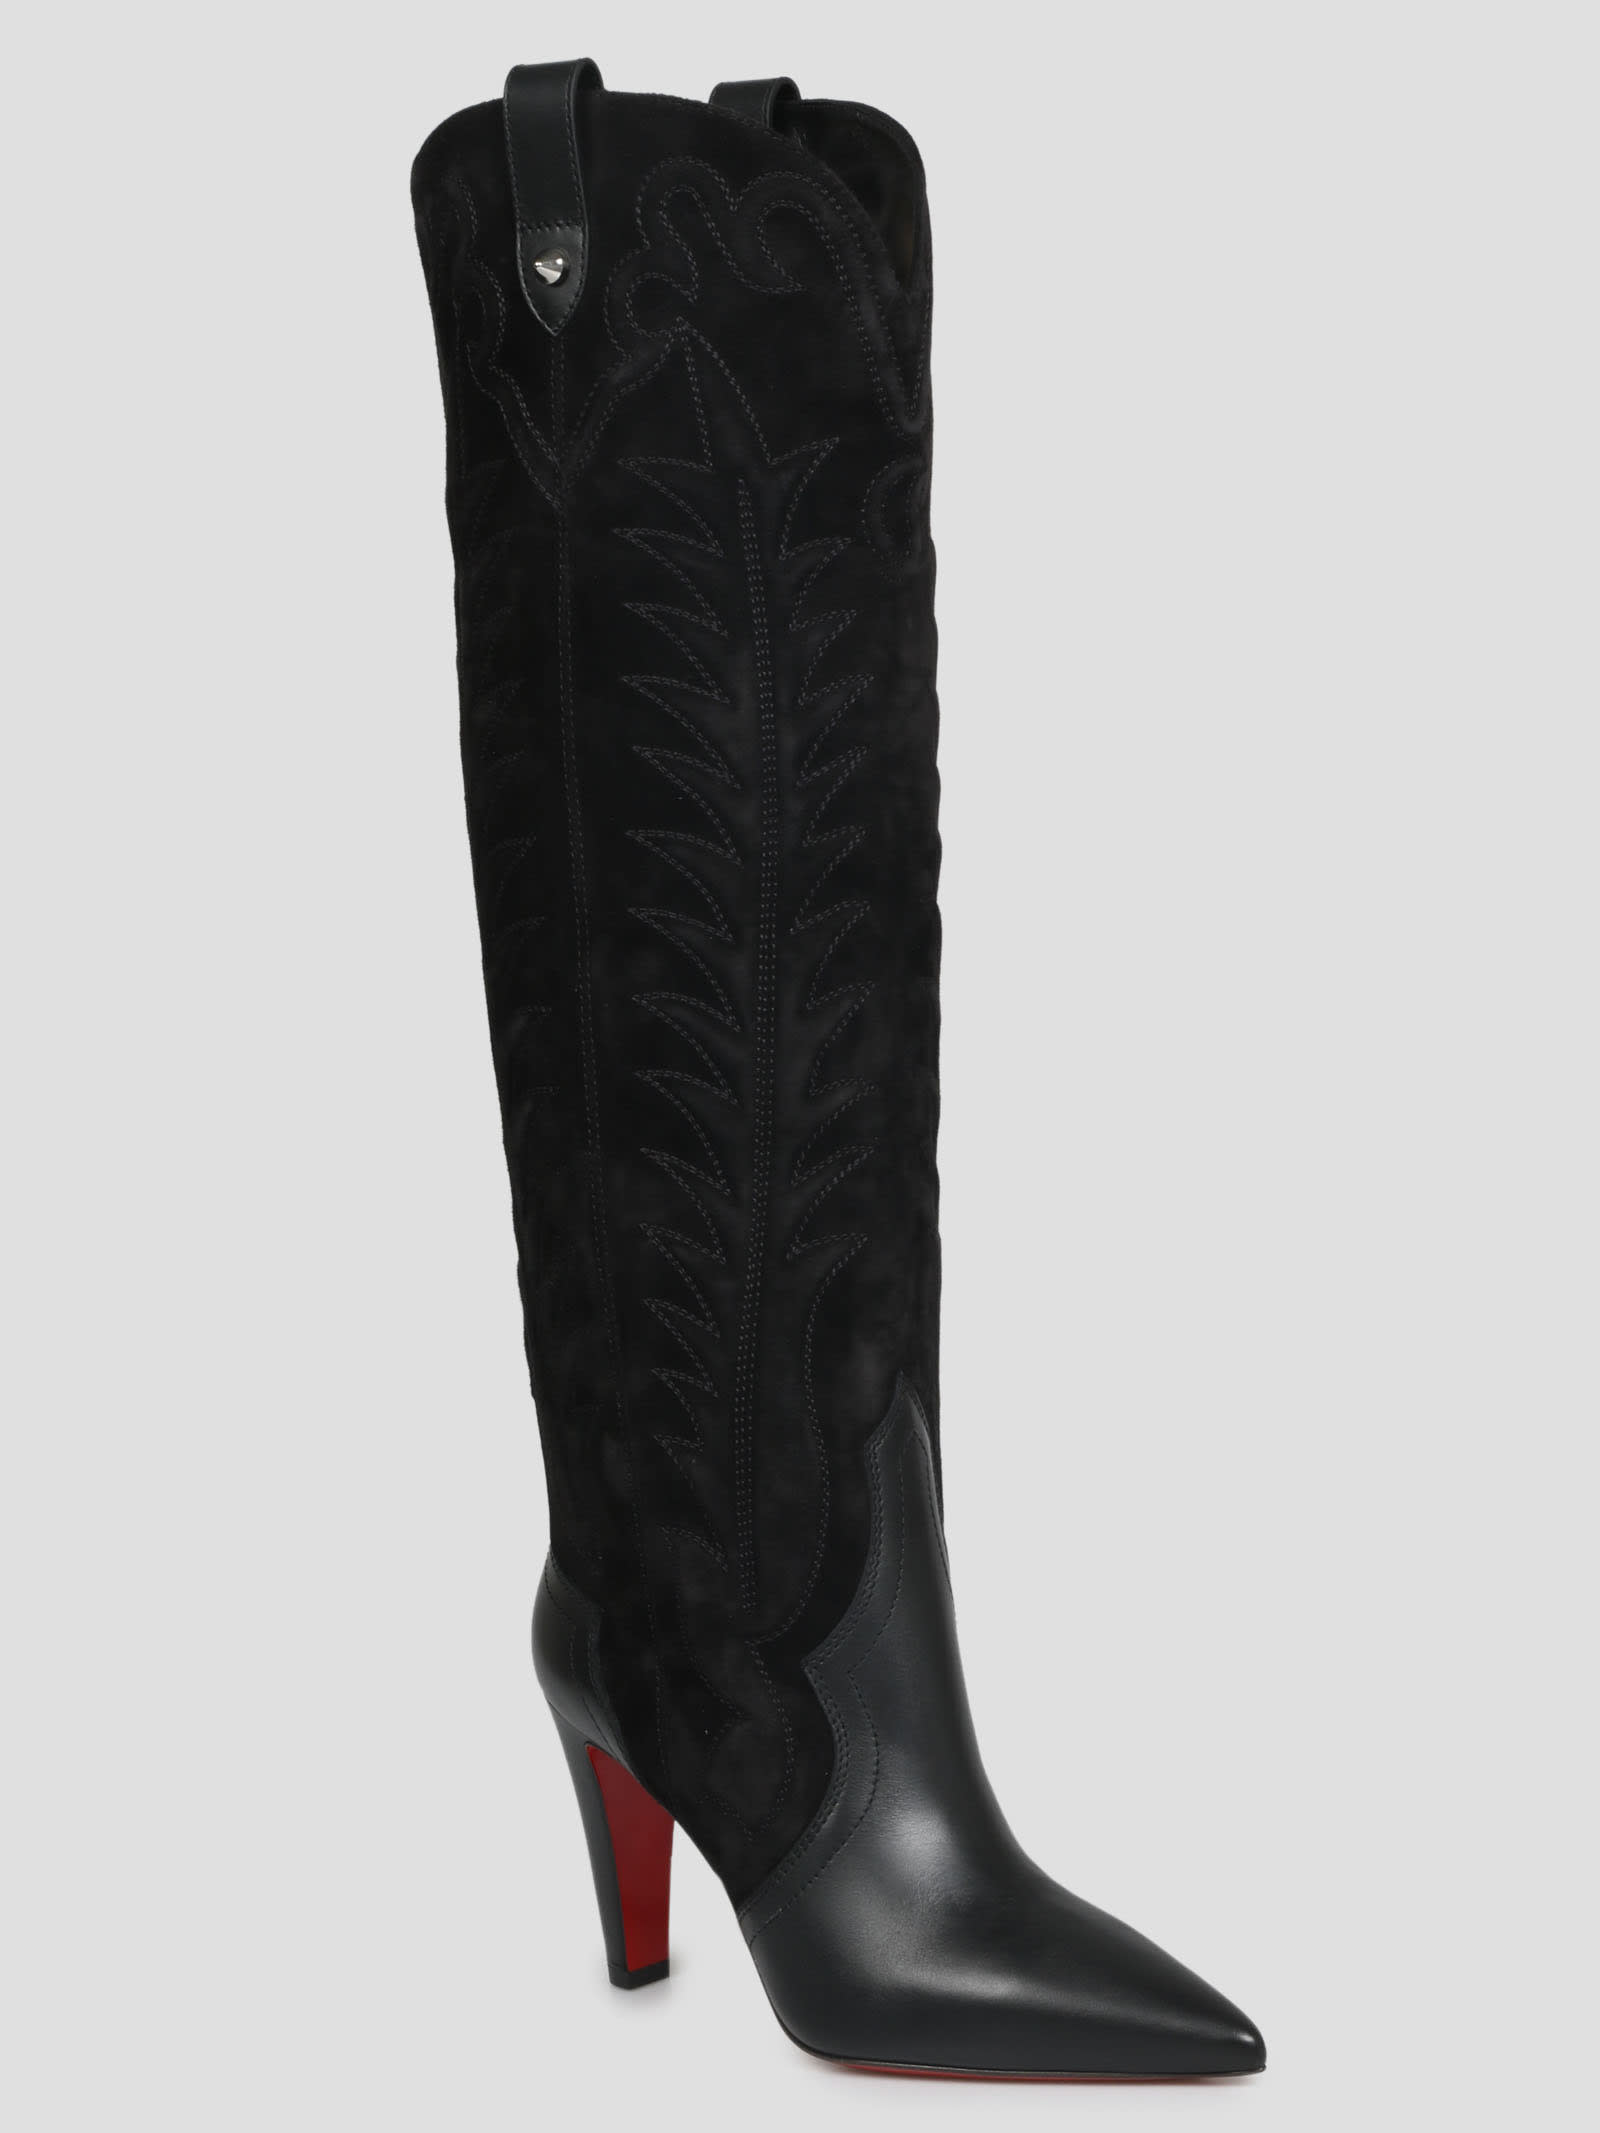 Christian Louboutin, Shoes, Christian Louboutin Santia Pointed Toe Knee  High Cowboy Boots White Suede